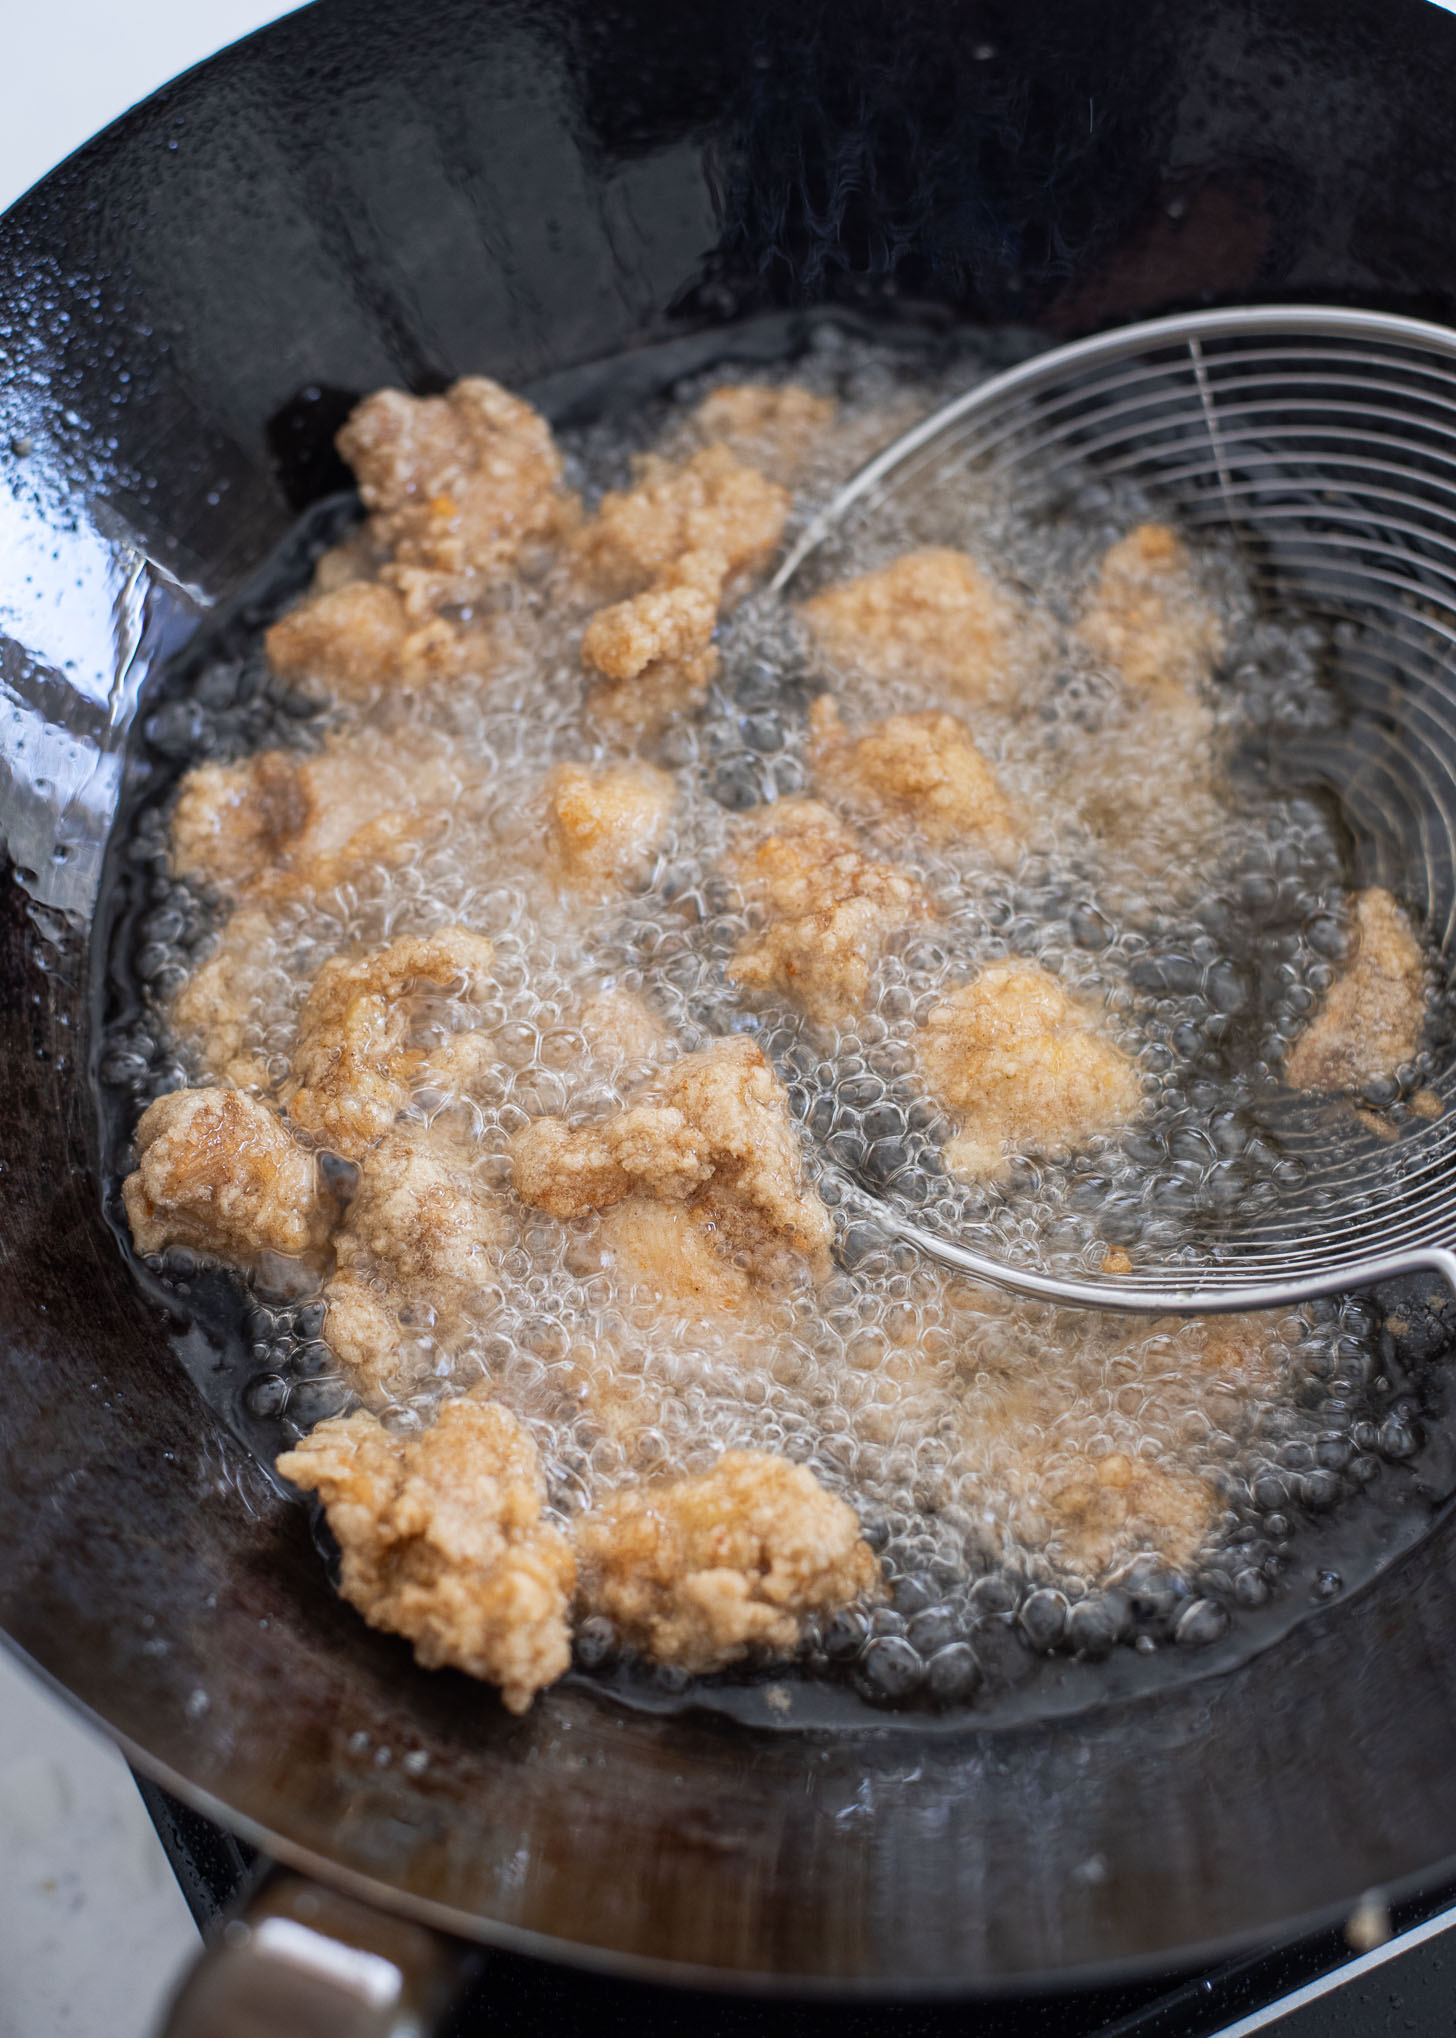 Chicken pieces are deep frying second time in hot oil.